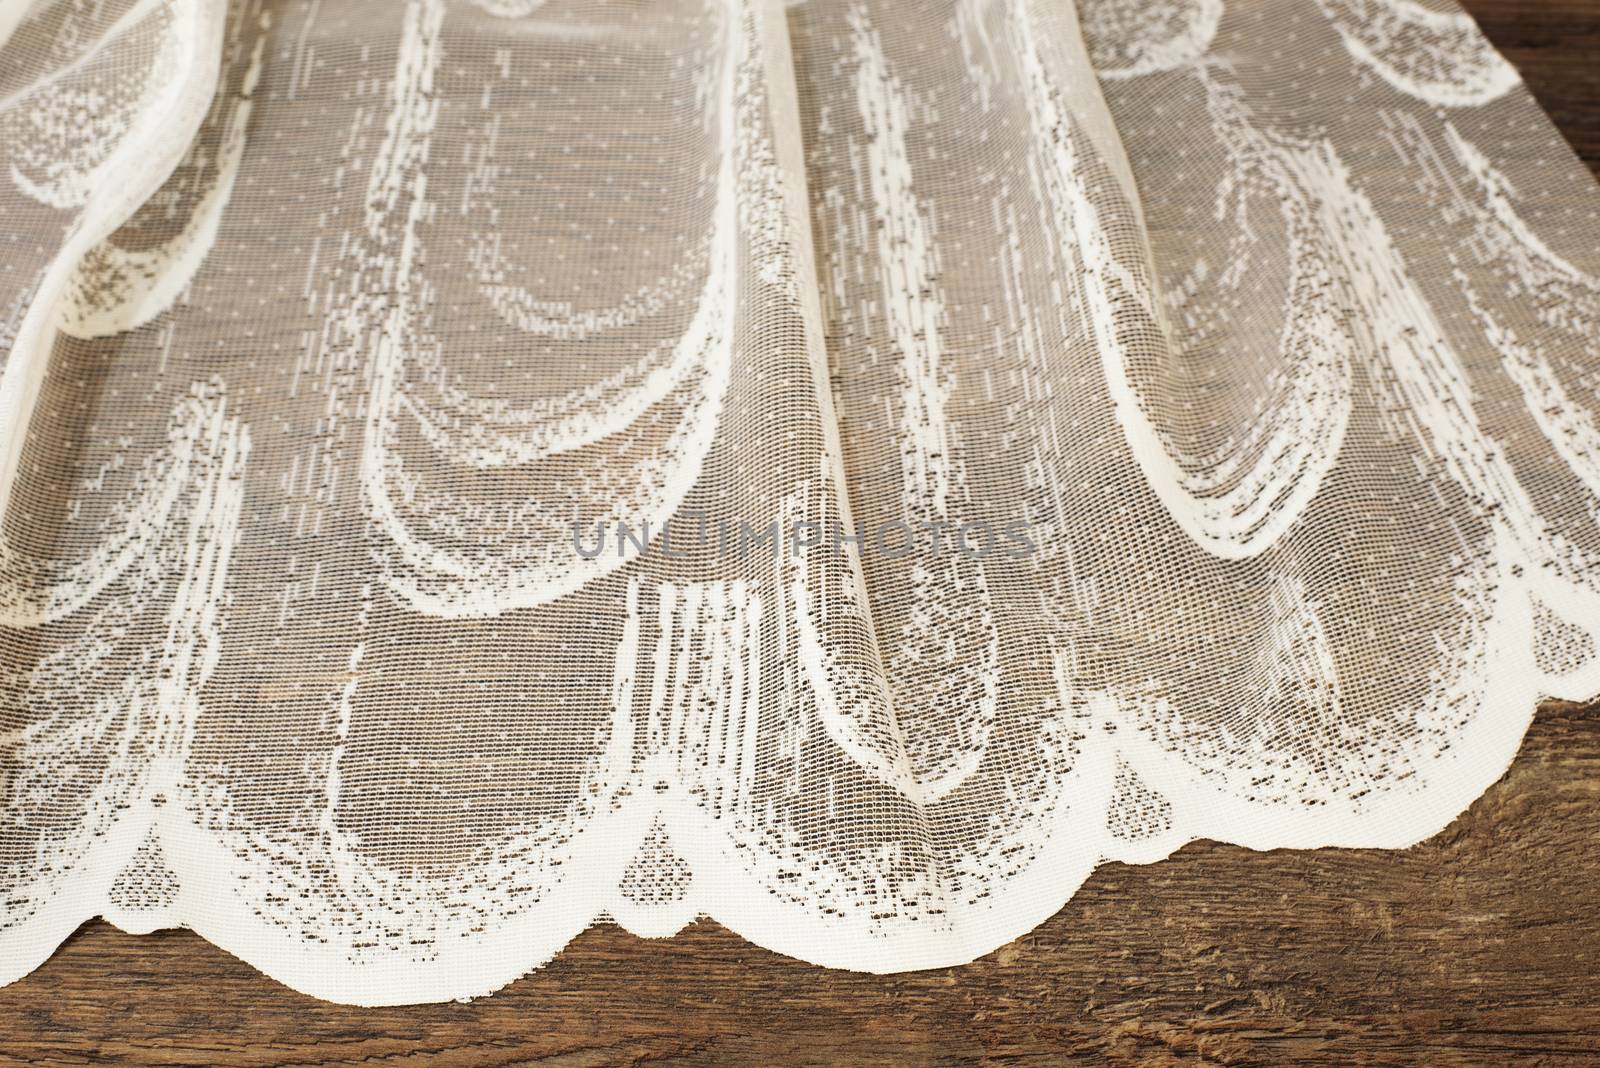 Close up of Beautiful White Tulle. Sheer Curtains Fabric Sample. Texture, Background, Pattern. Wedding Concept. Interior Design. Vintage Lace Tulle Chiffon by sevda_stancheva